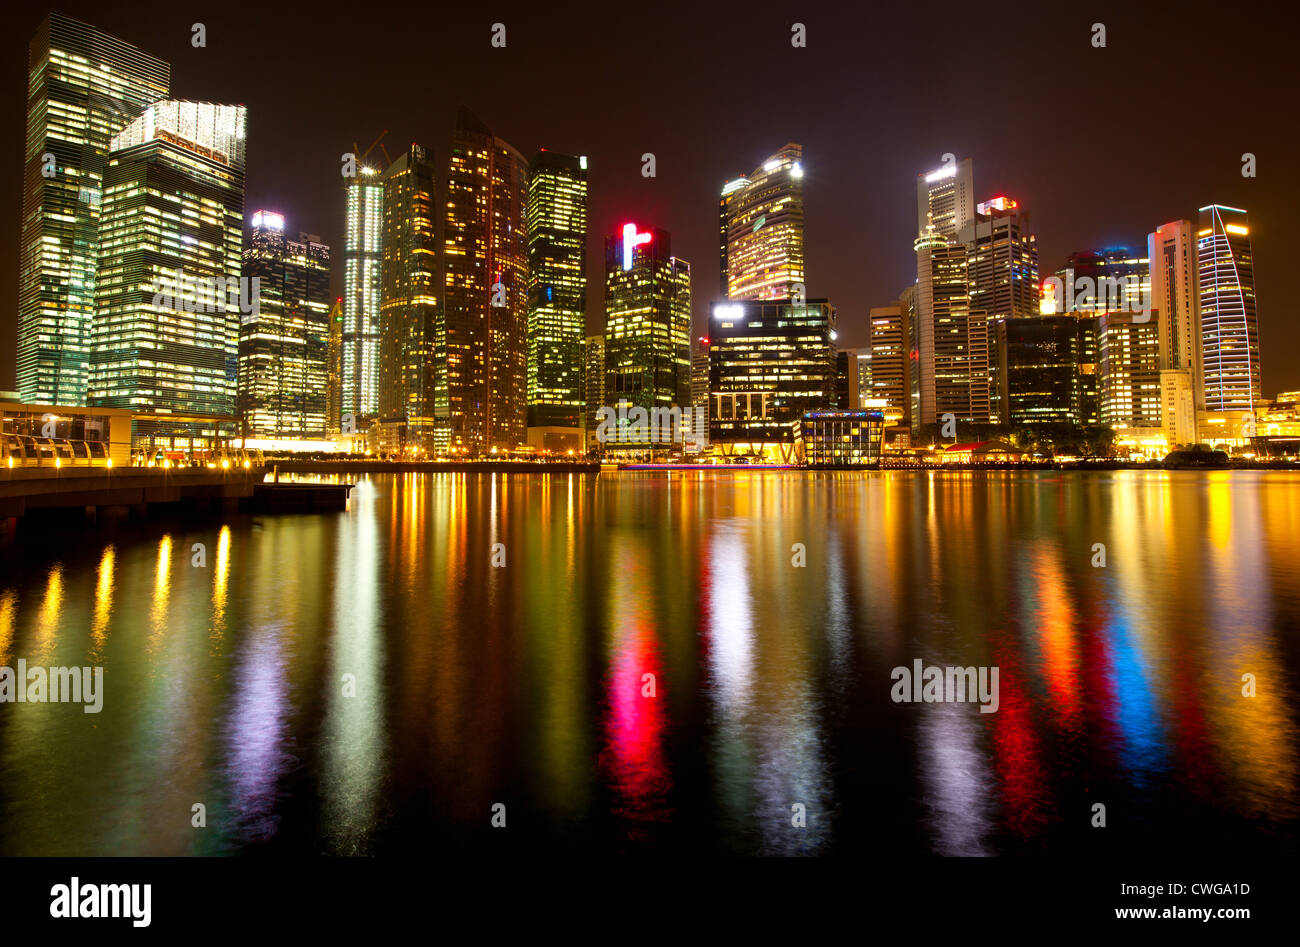 A view of Singapore business district in the night time with water reflections. Stock Photo